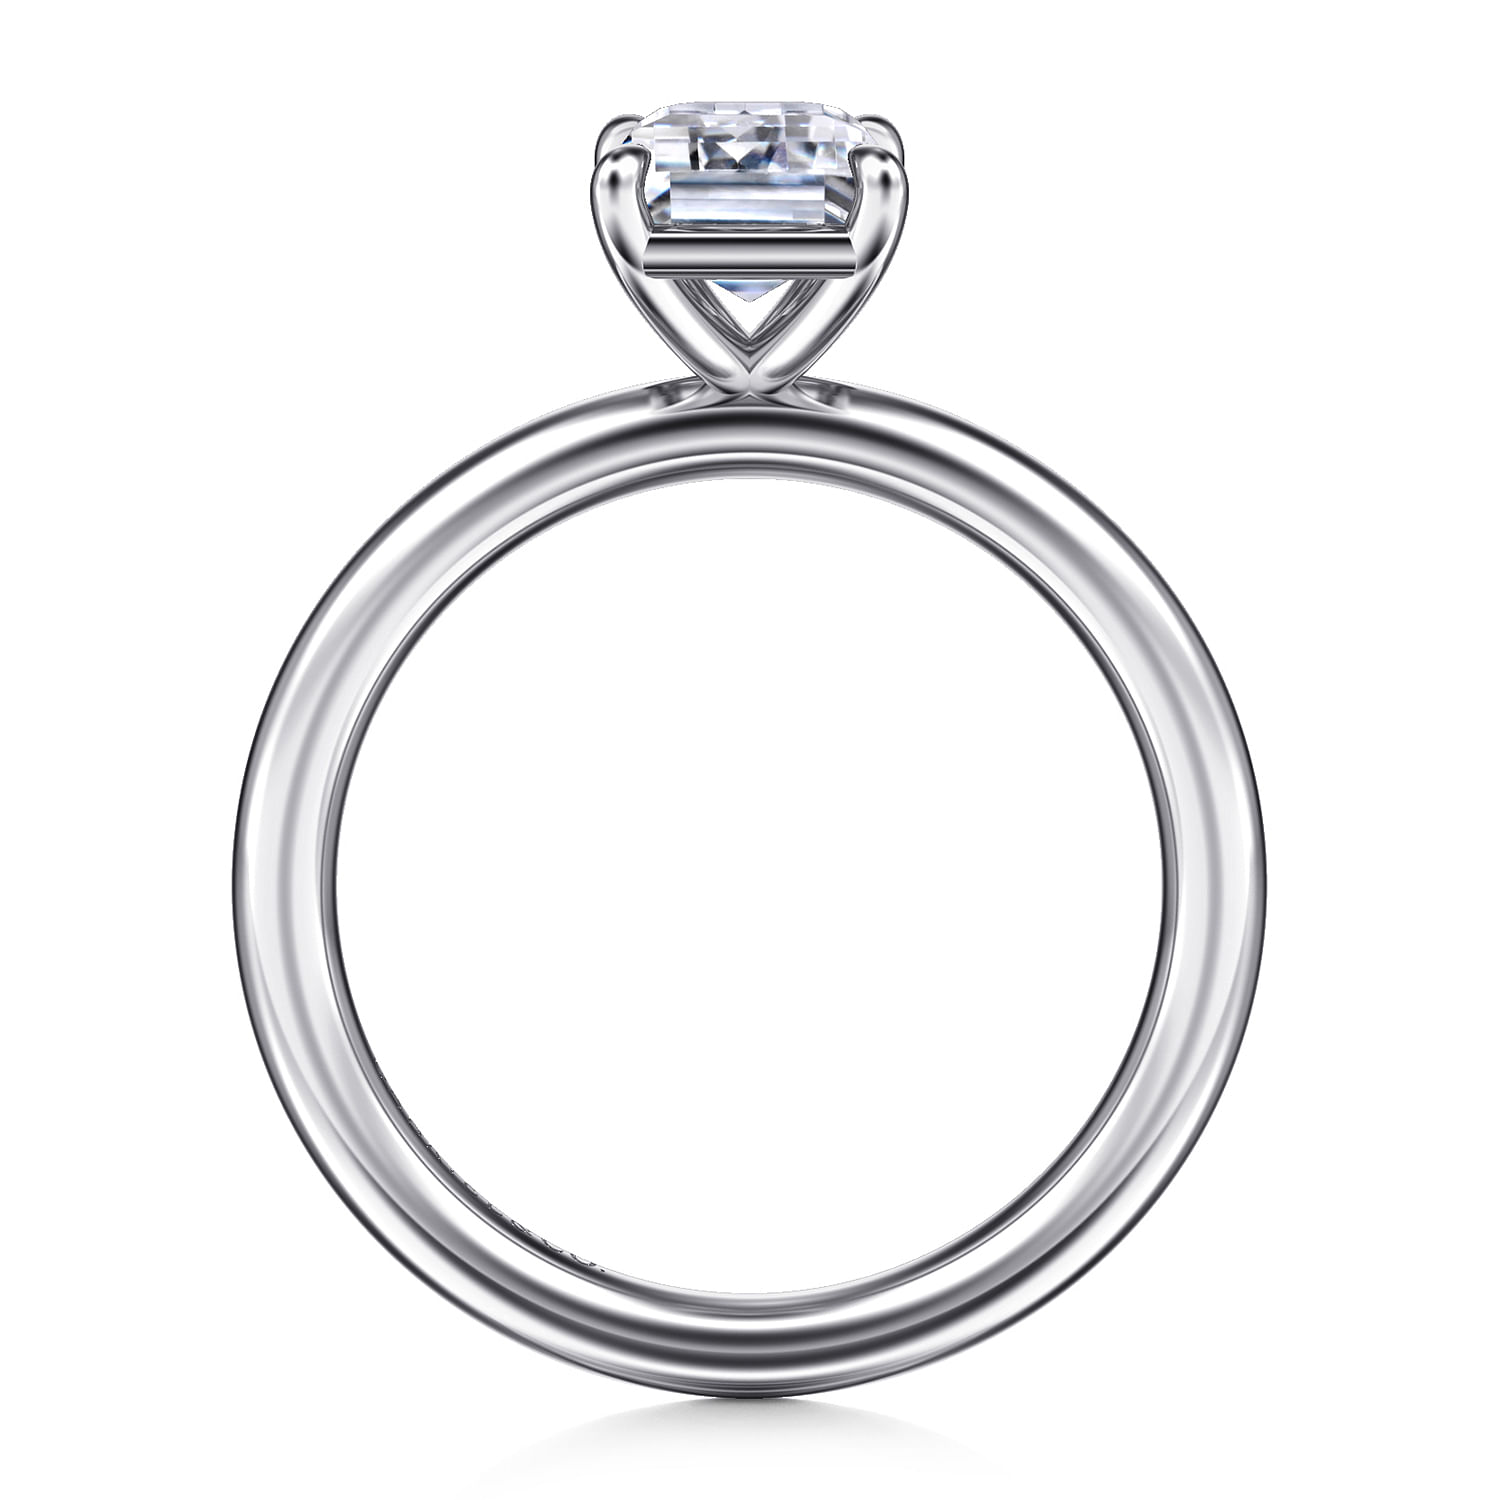 14K White Gold Emerald Cut Solitaire Engagement Ring